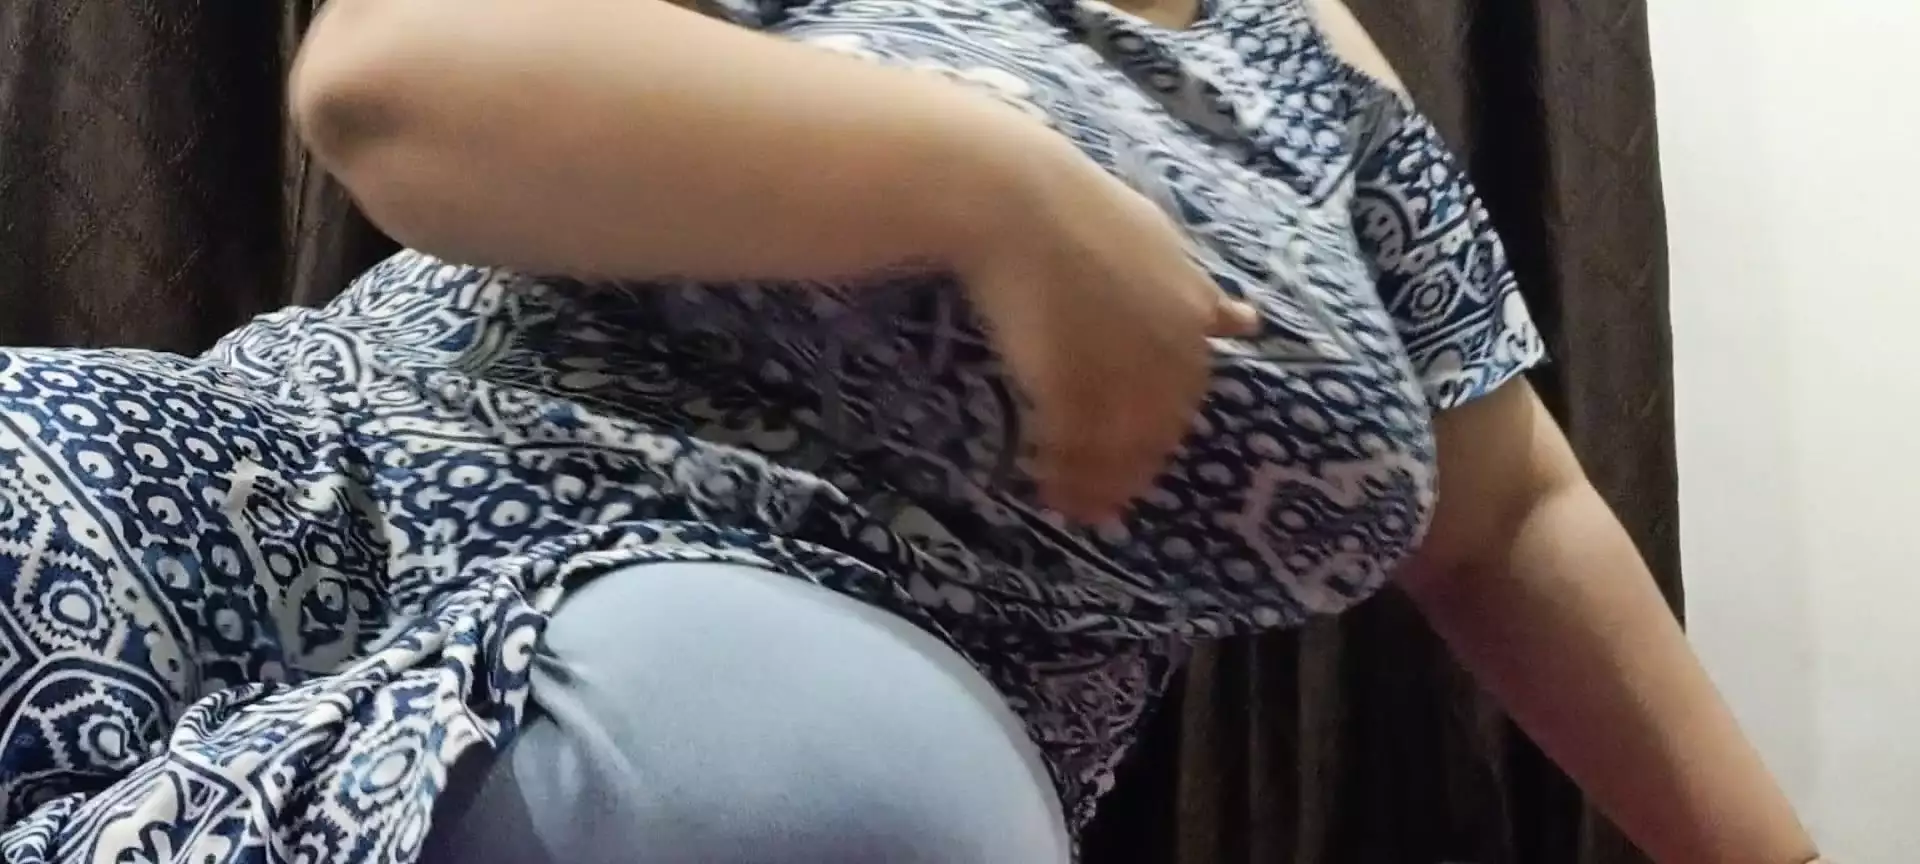 Desi Bbw Chubby Bhabhi Get Tits Fuck and Creampie picture image